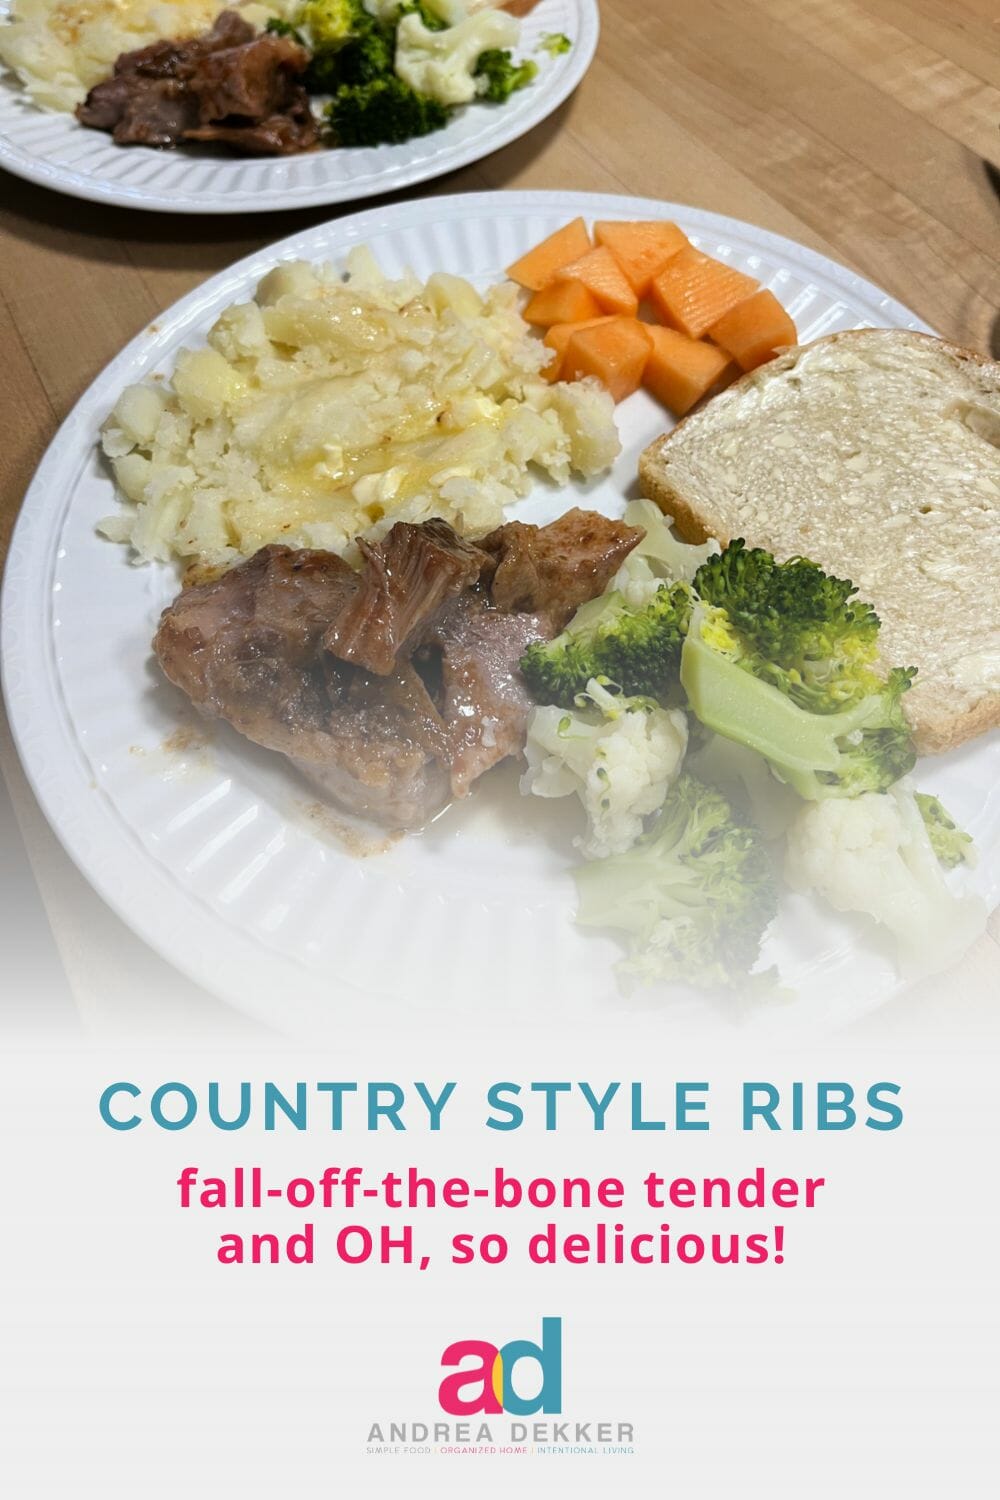 Country-style spare ribs are a fall-off-the-bone tender alternative to traditional ribs. They are cheap, easy to make, and SO good! This might just be your new favorite pork recipe. via @andreadekker